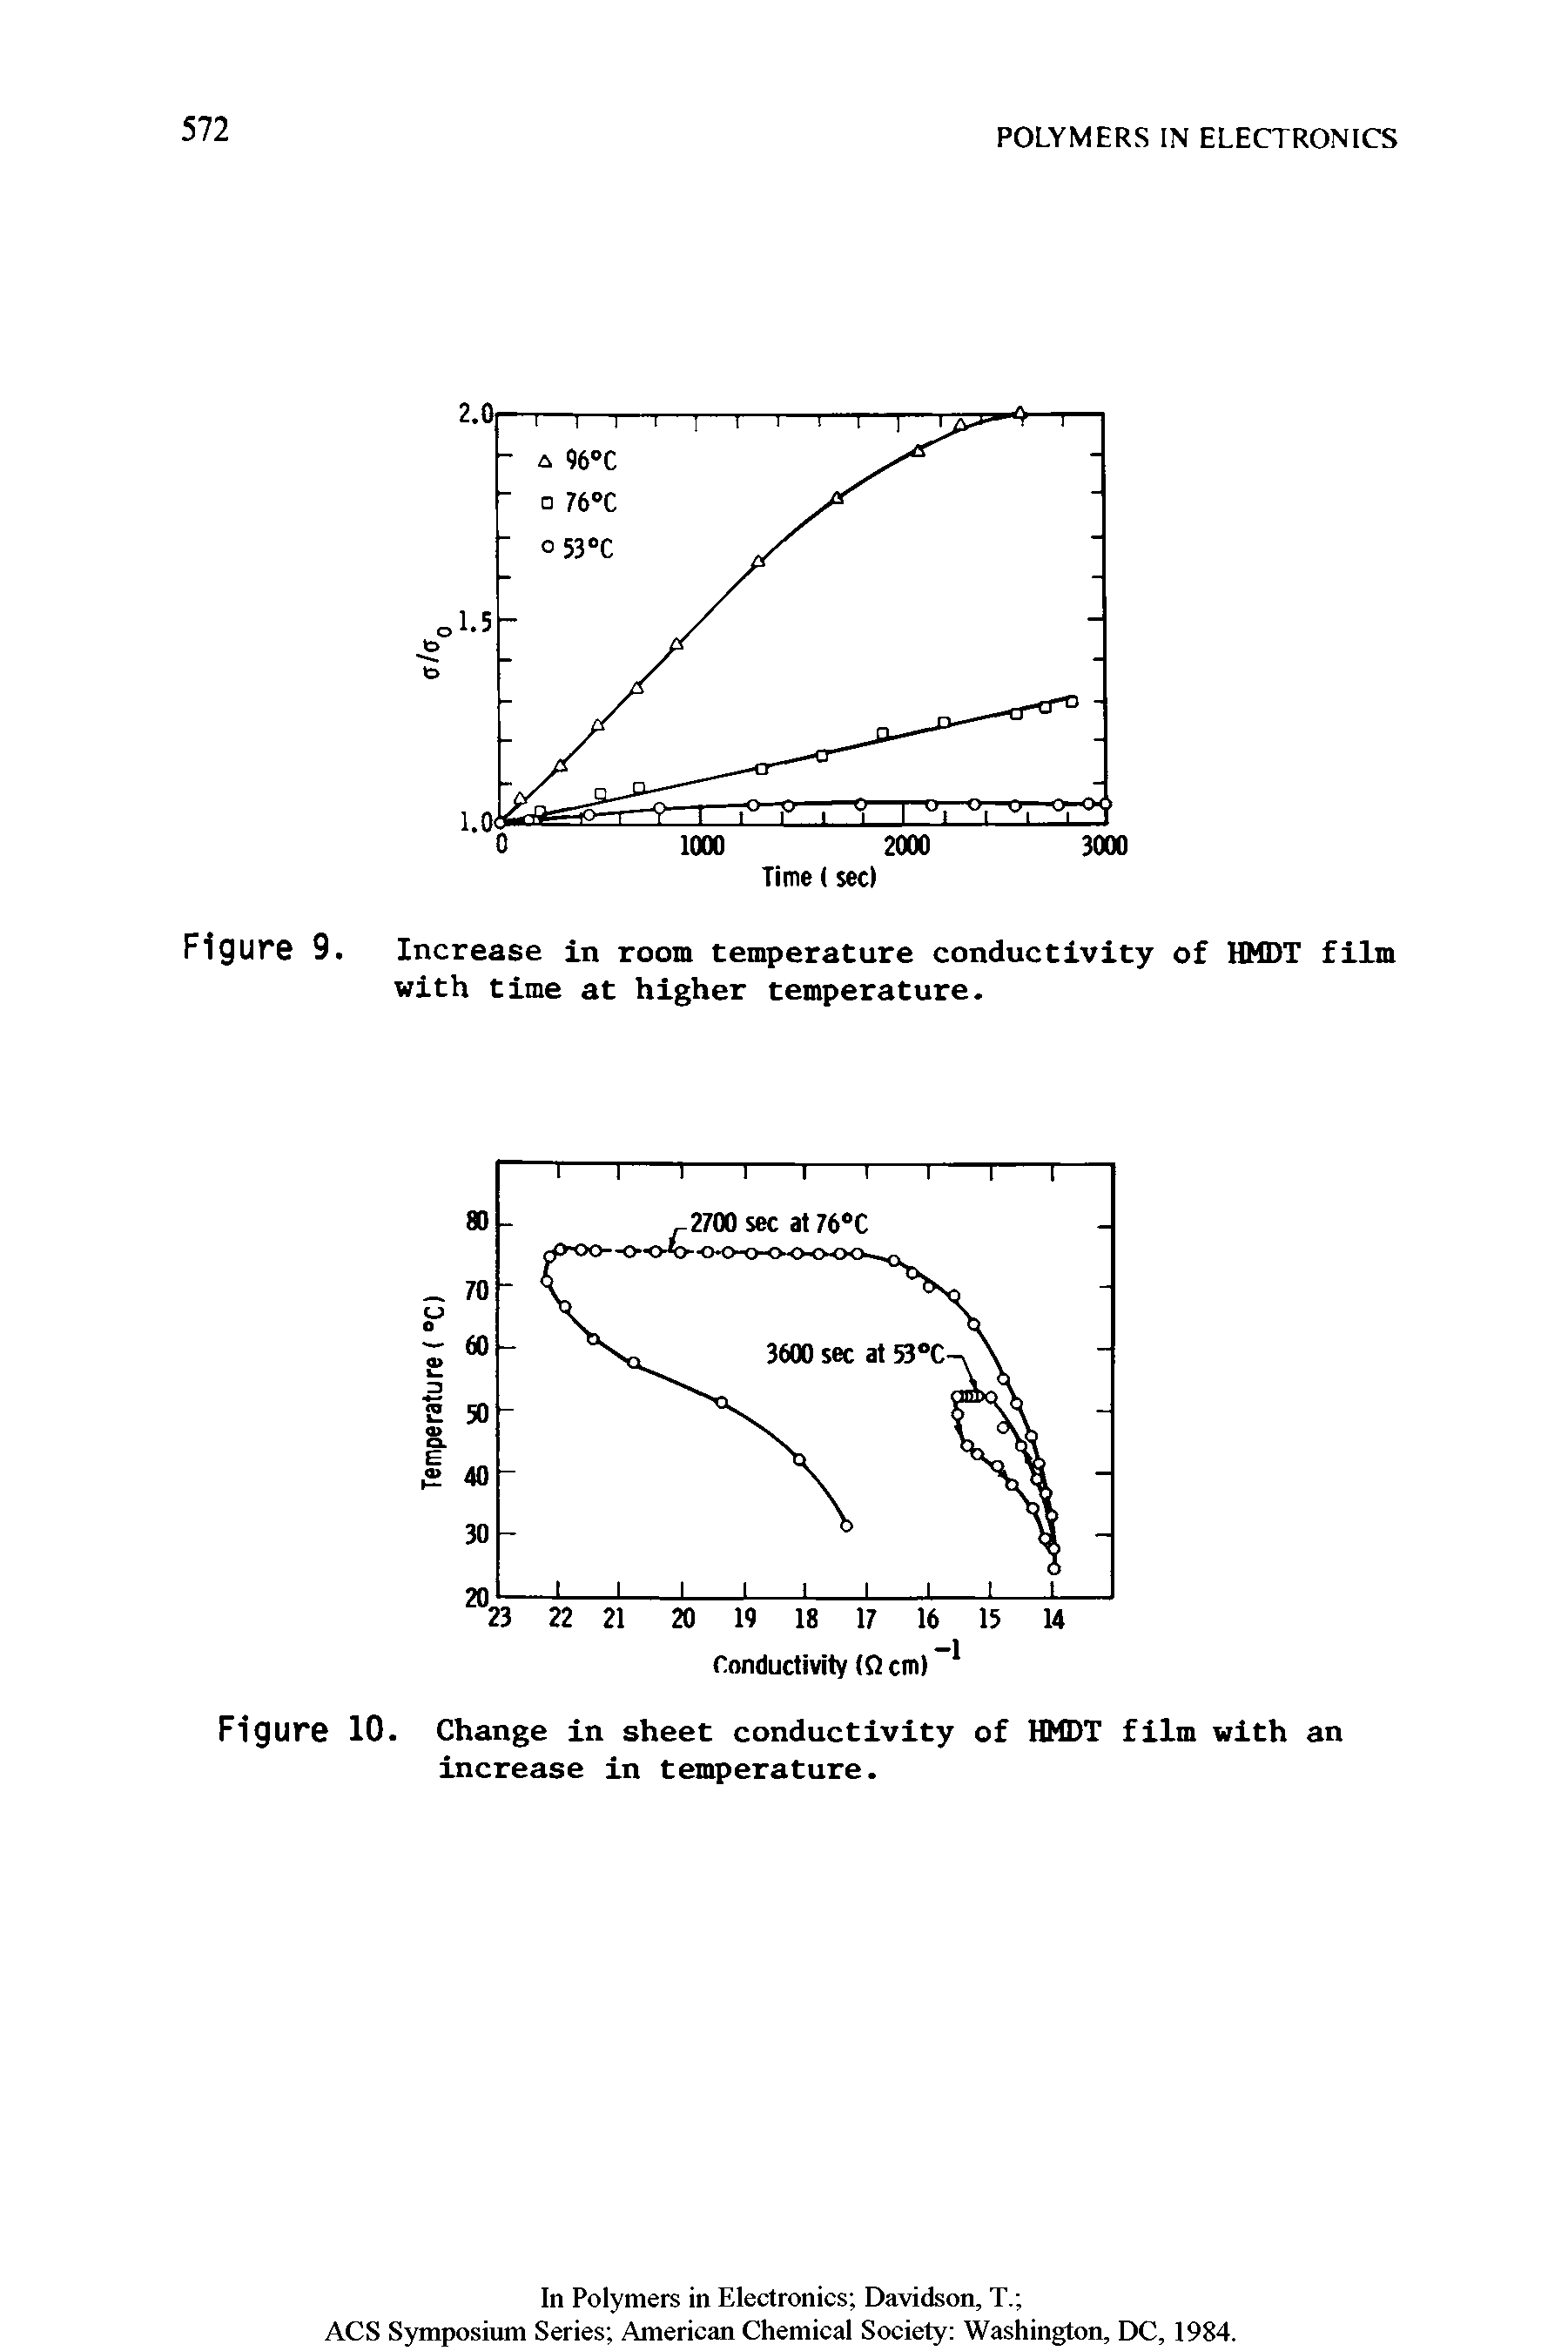 Figure 9. Increase in room temperature conductivity of HMDT film with time at higher temperature.